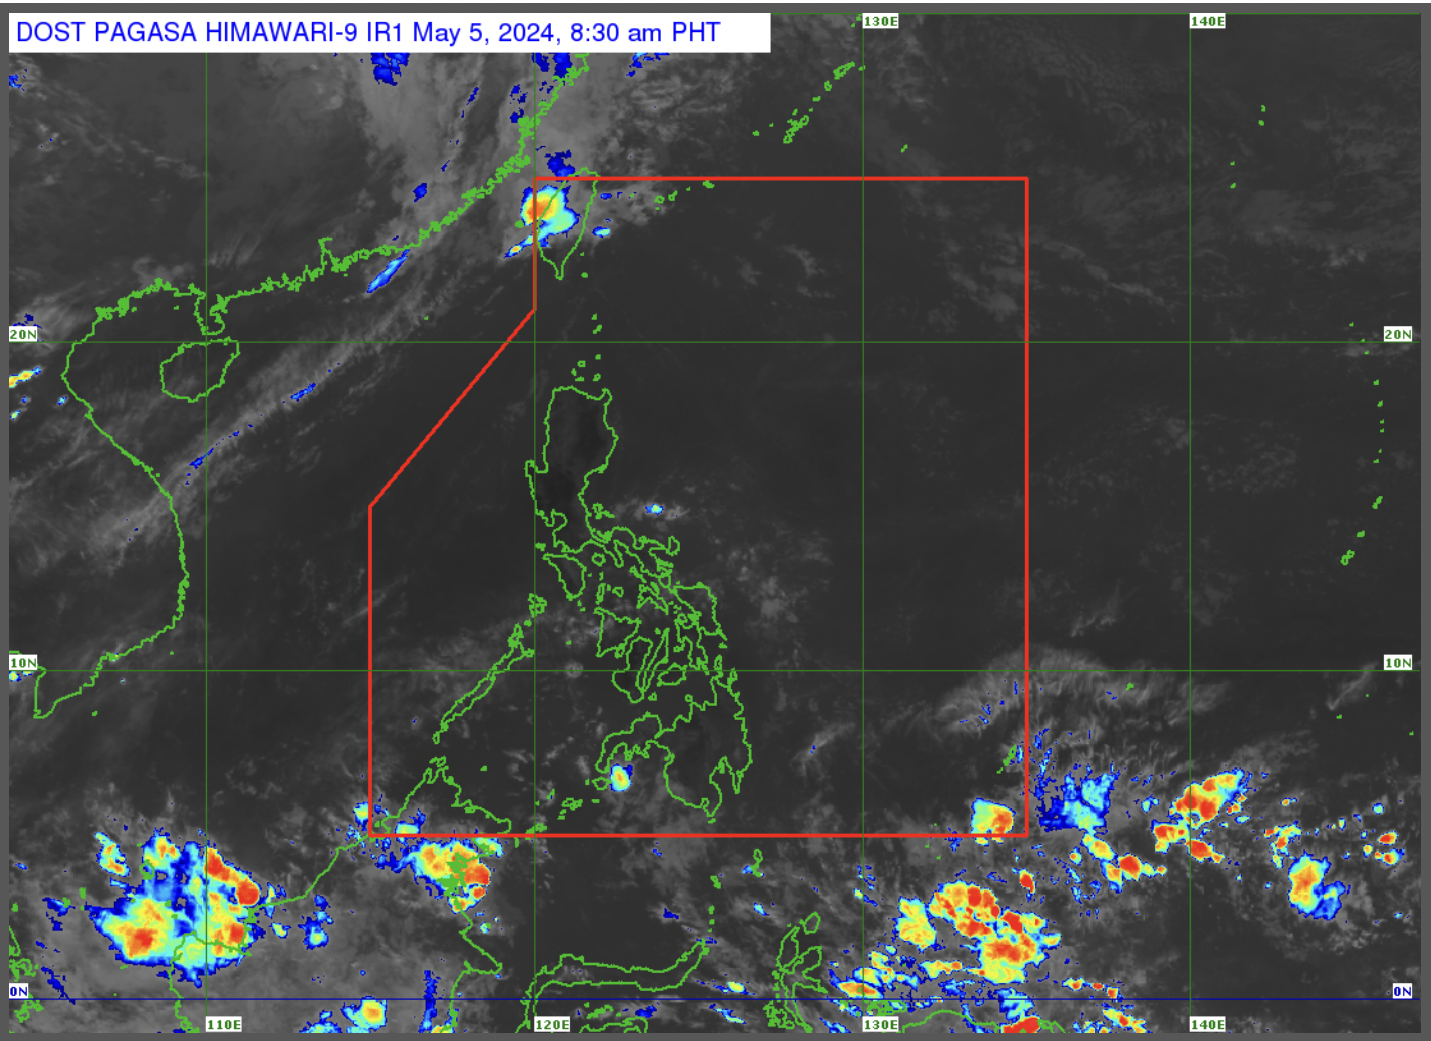 expect hot, humid weather with isolated rain showers over ph on sunday